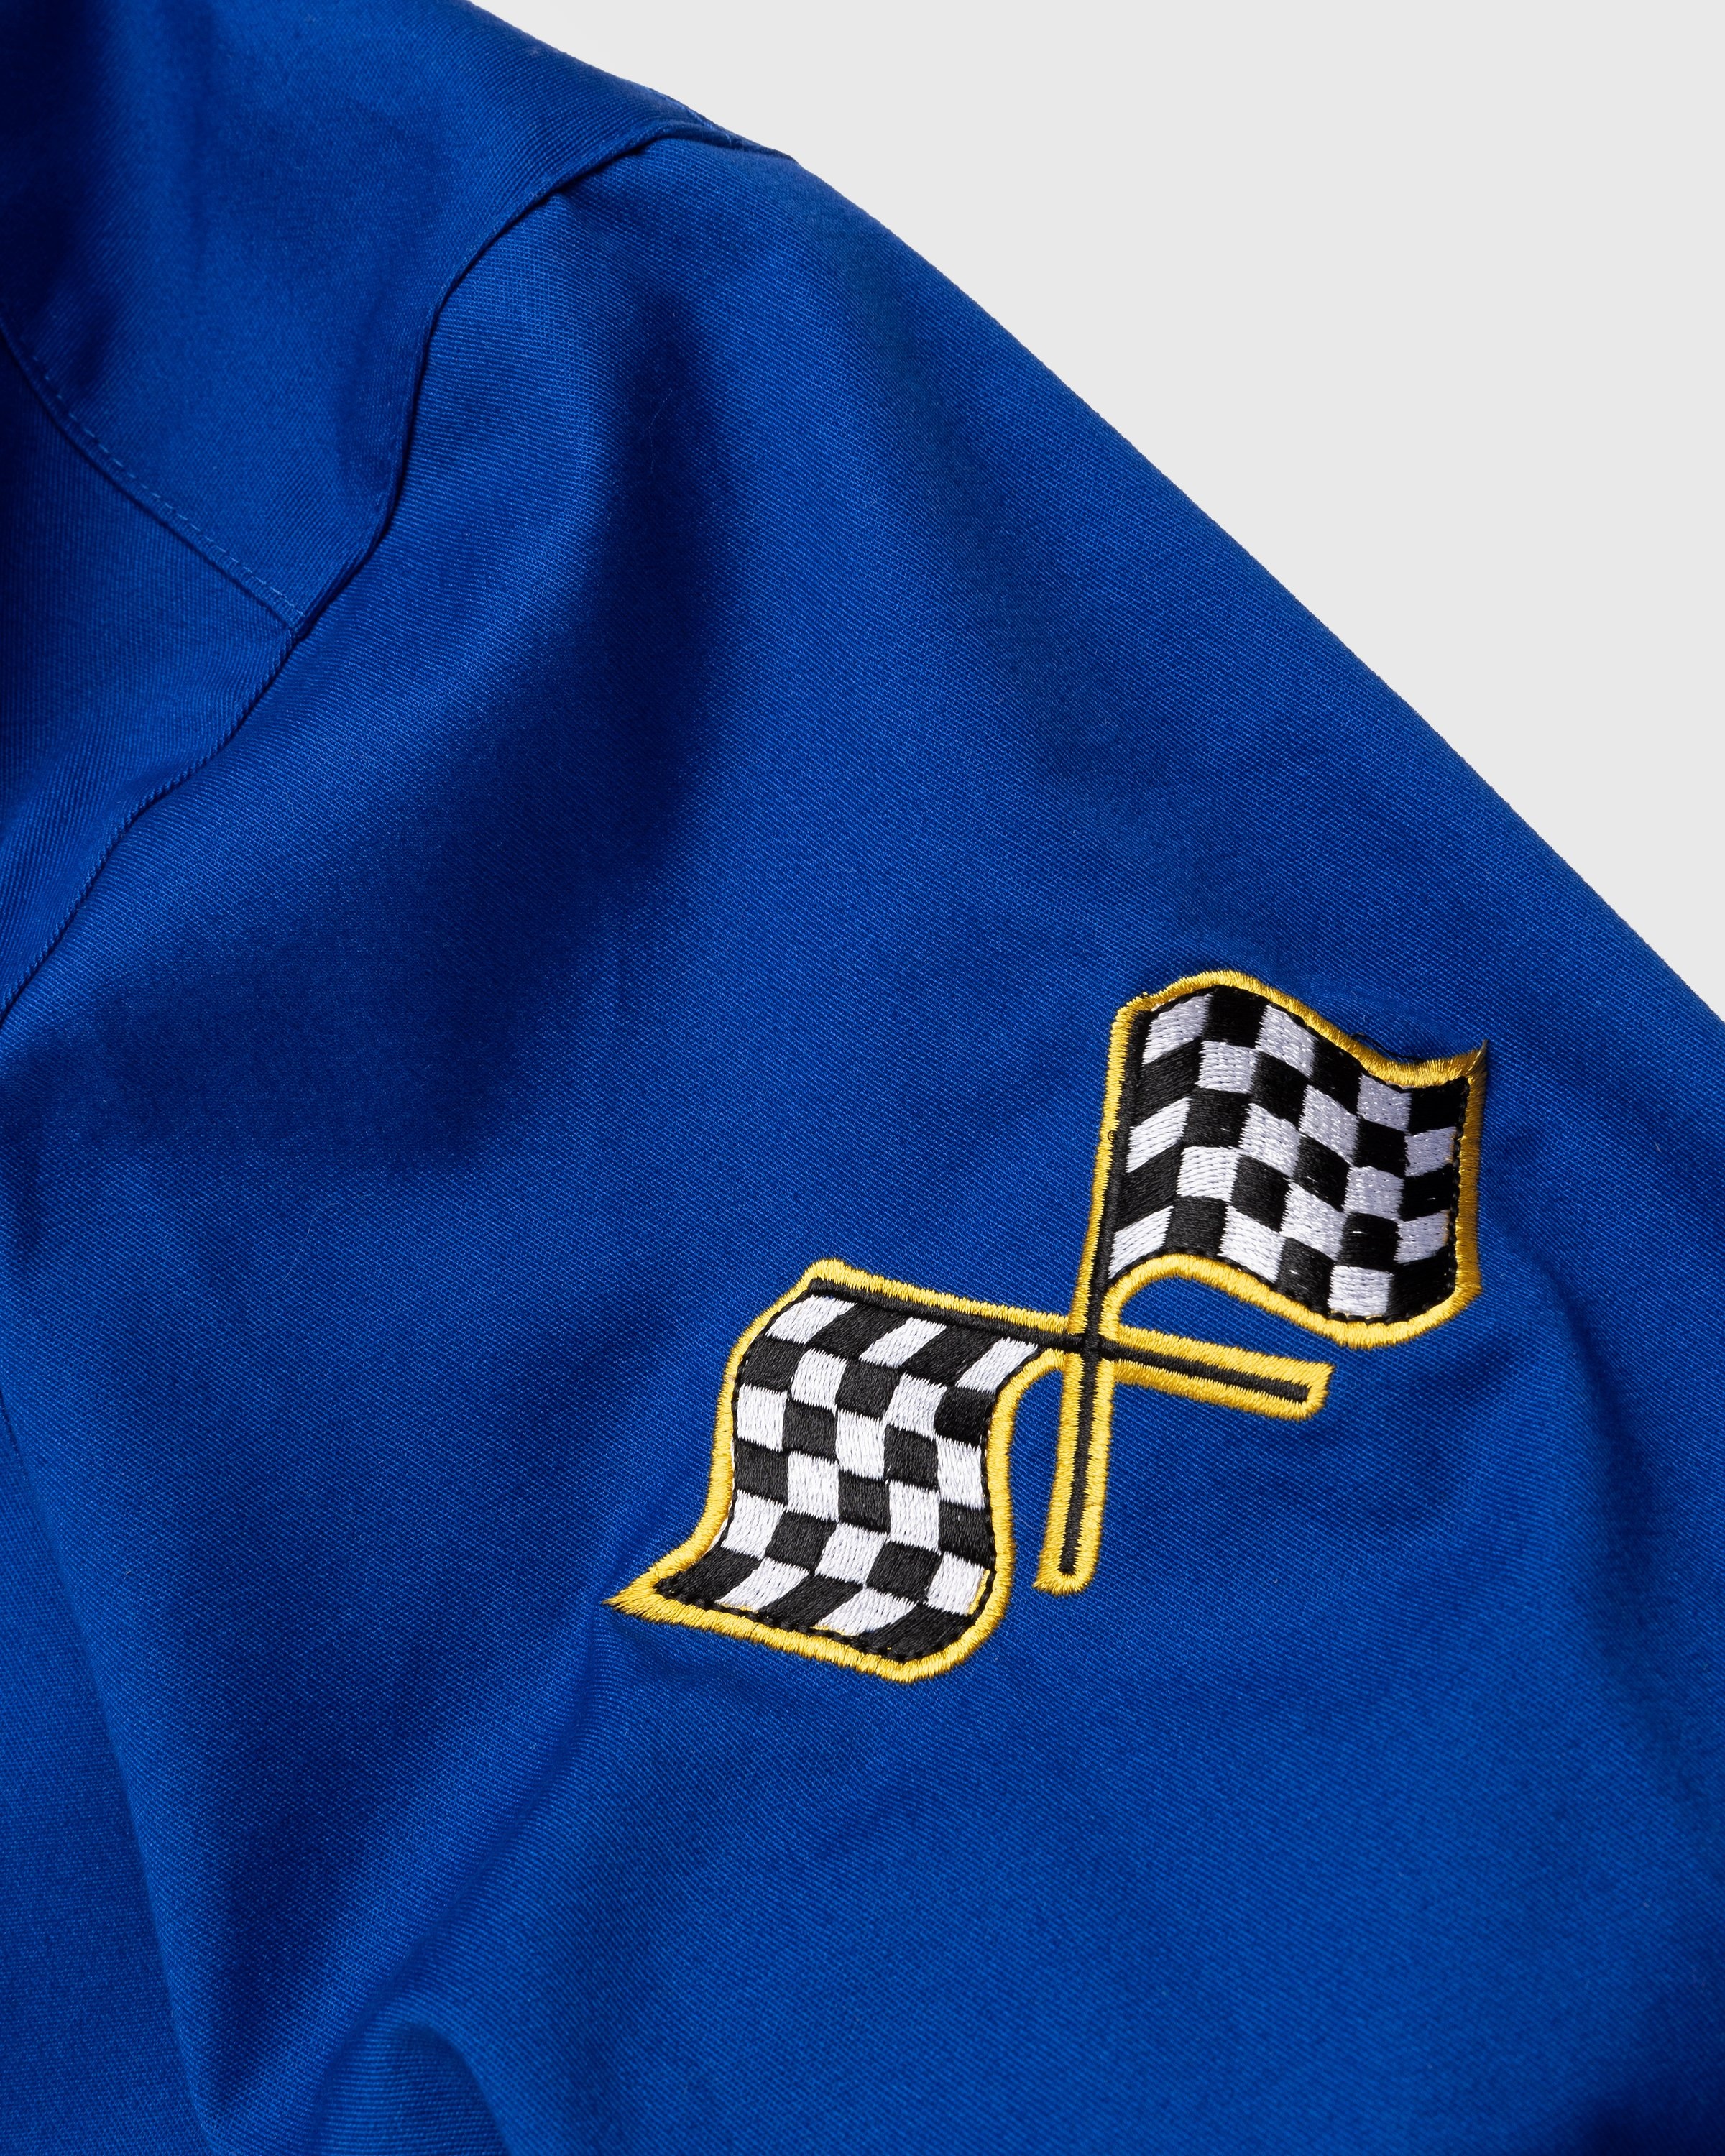 Adidas – Sean Wotherspoon x Hot Wheels Race Jacket Blue - Outerwear - Blue - Image 9